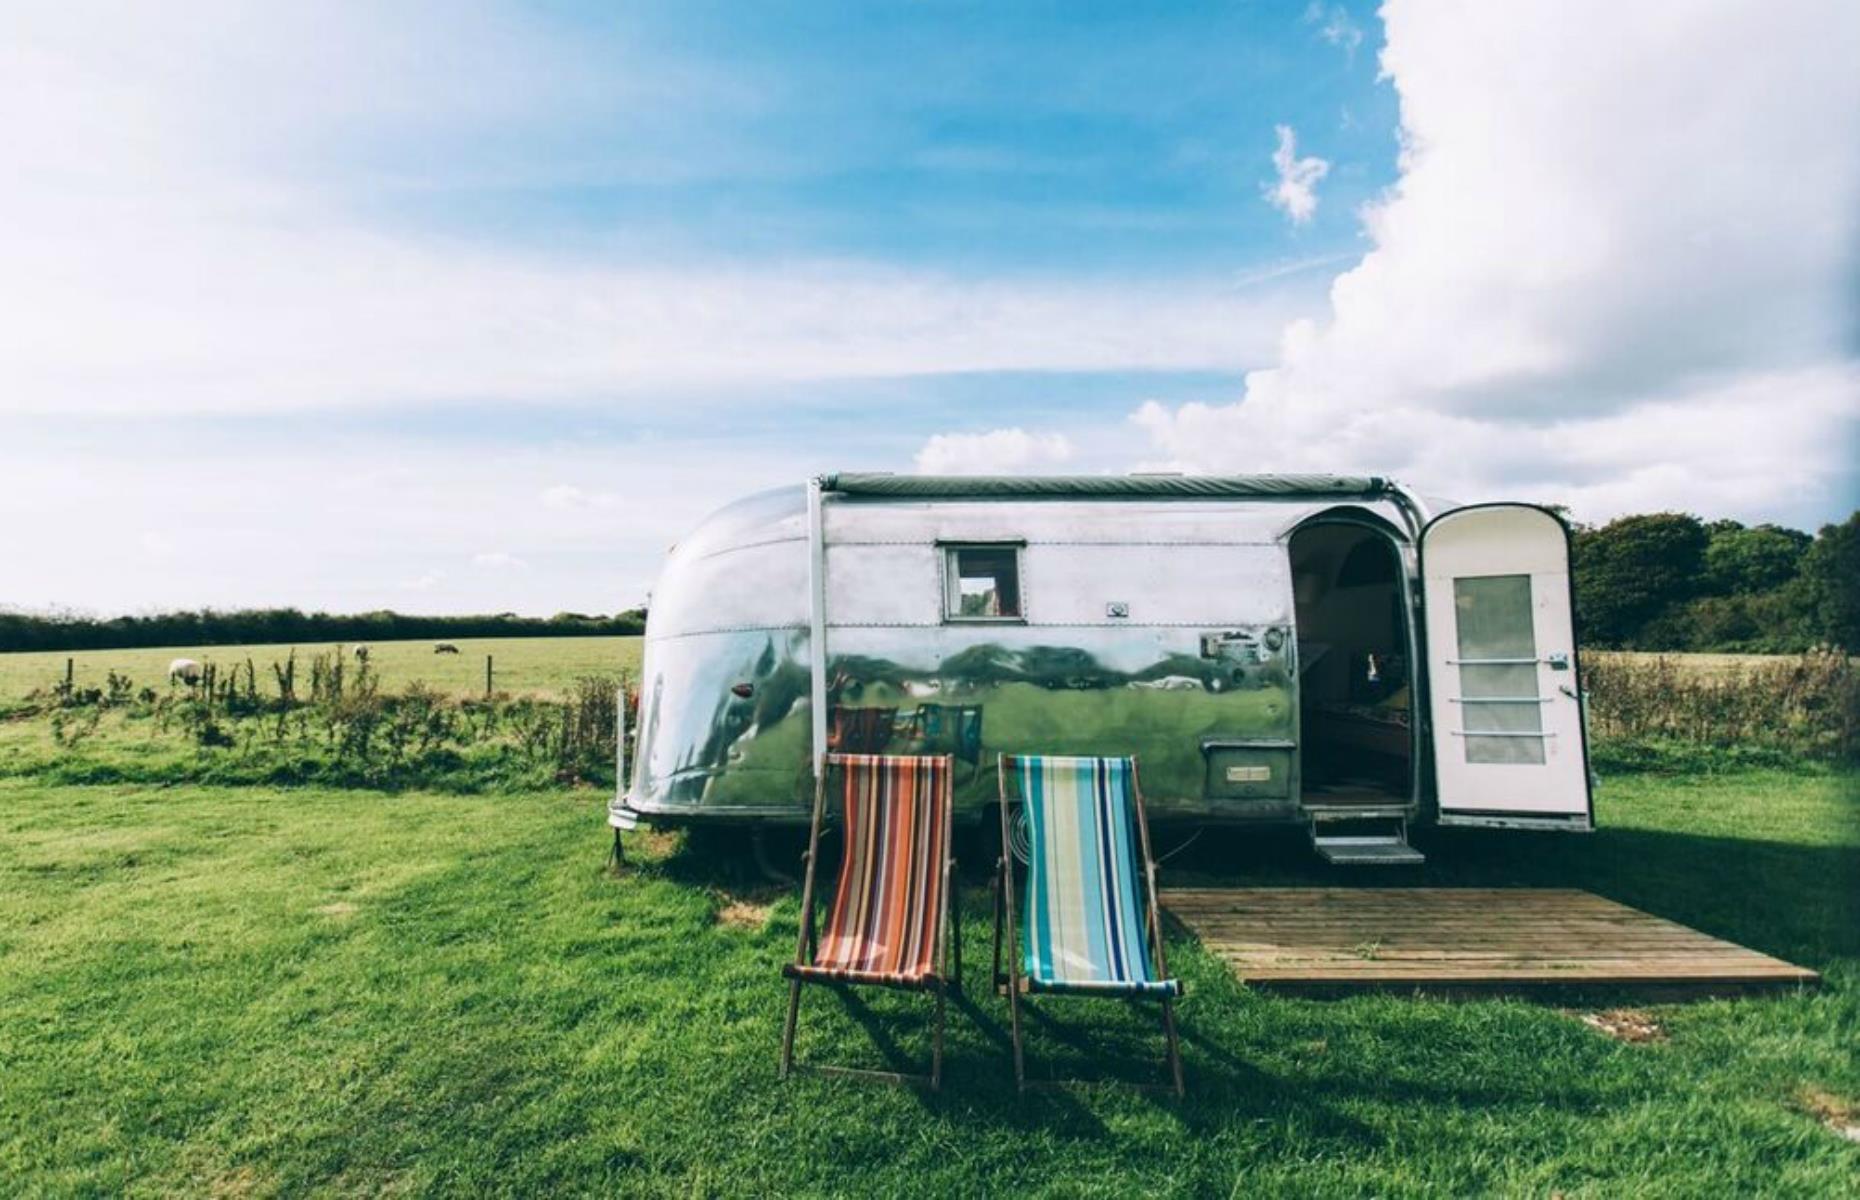 <p>Vintage Vacations specialises in retro Airstream vacations on the Isle of Wight with models that date from 1944-1966, including Overlanders, Spartanettes and Safari Airstreams. Each trailer comes with its own barbecue, bench and deckchairs. Two, four and six-berth options are available.</p>